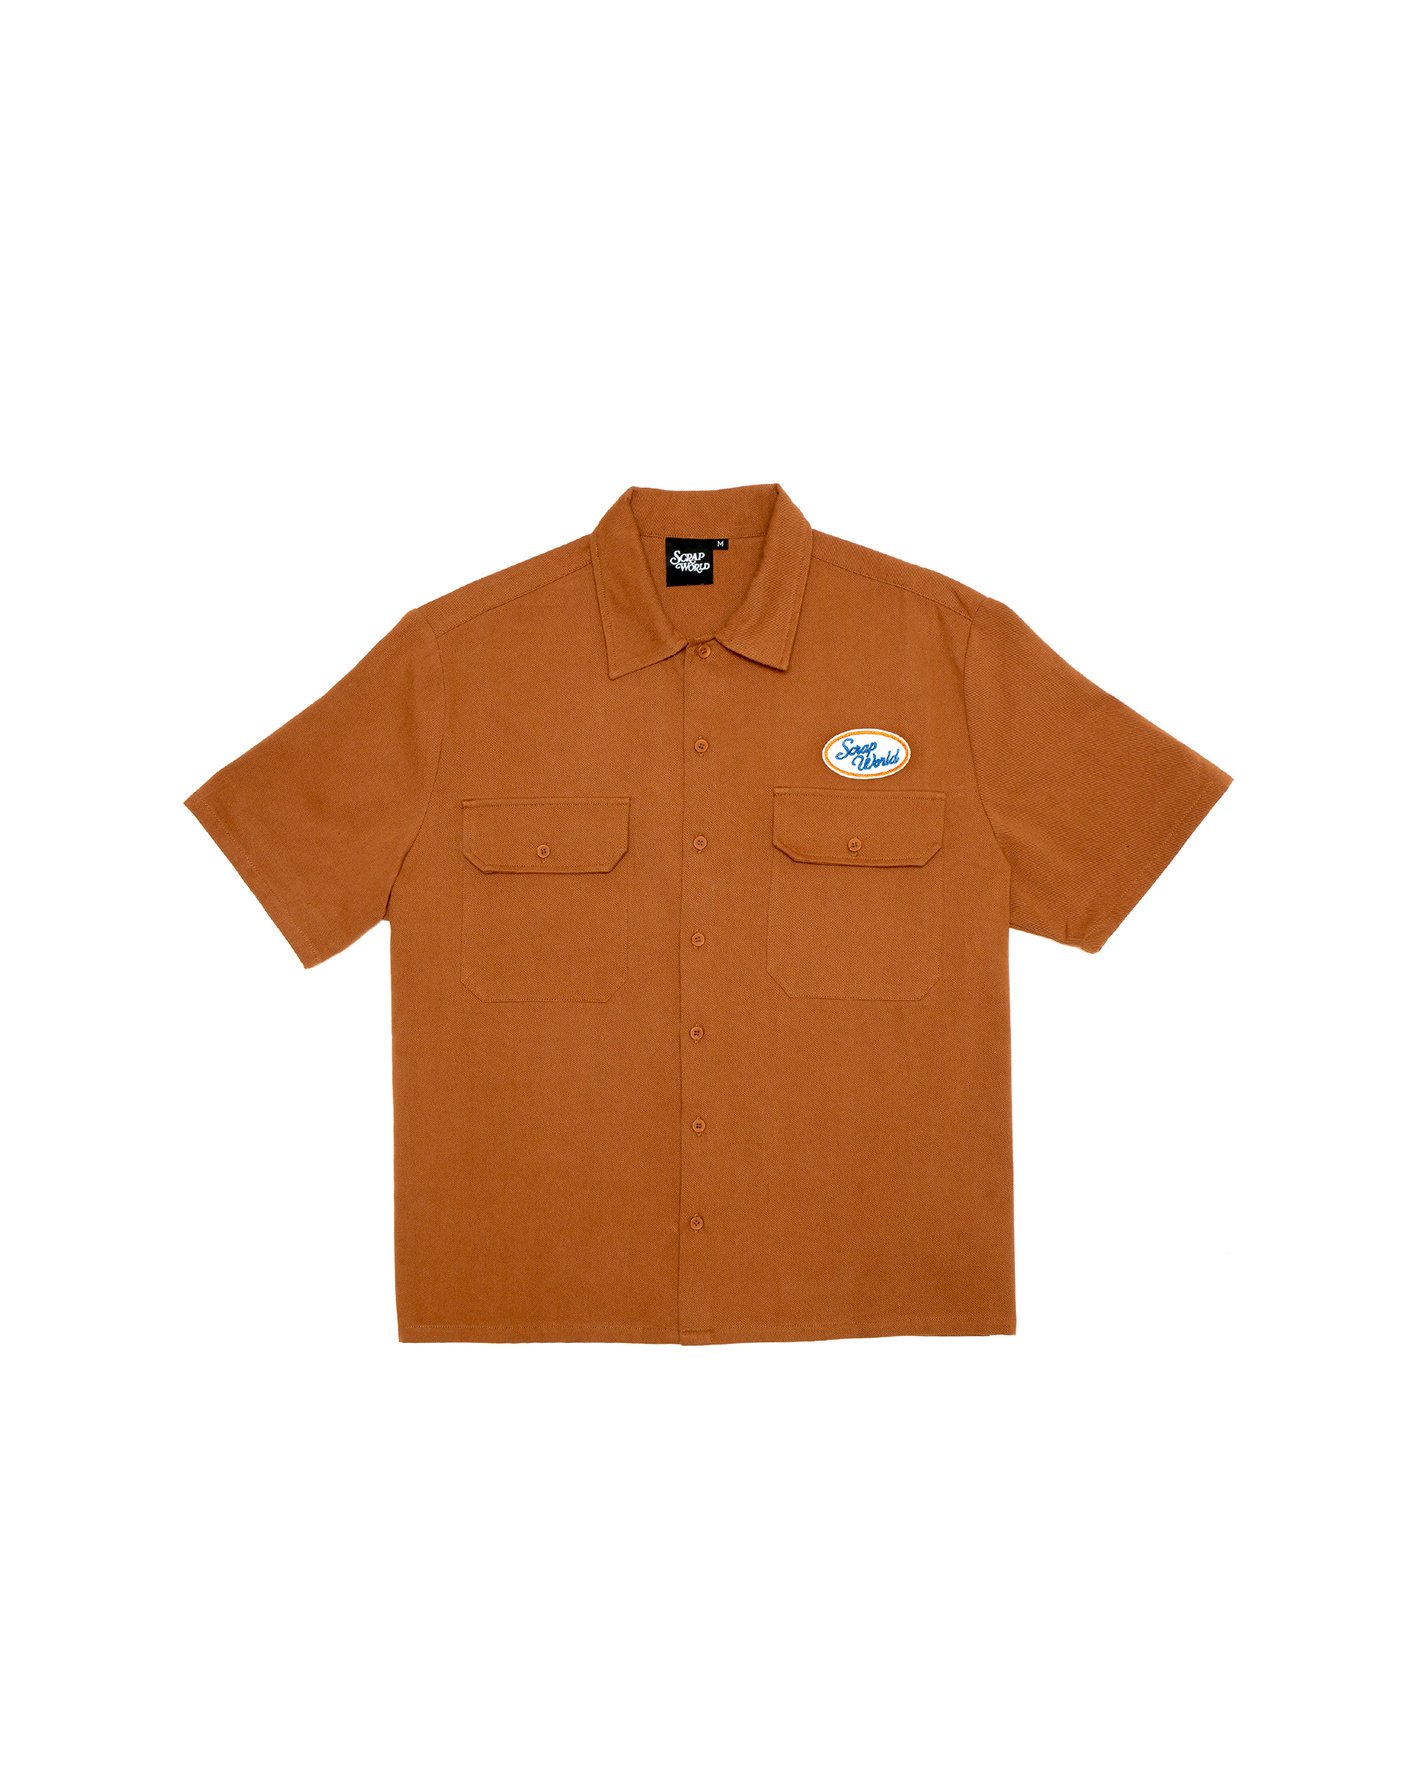 PATCH S/S SHIRT BROWN